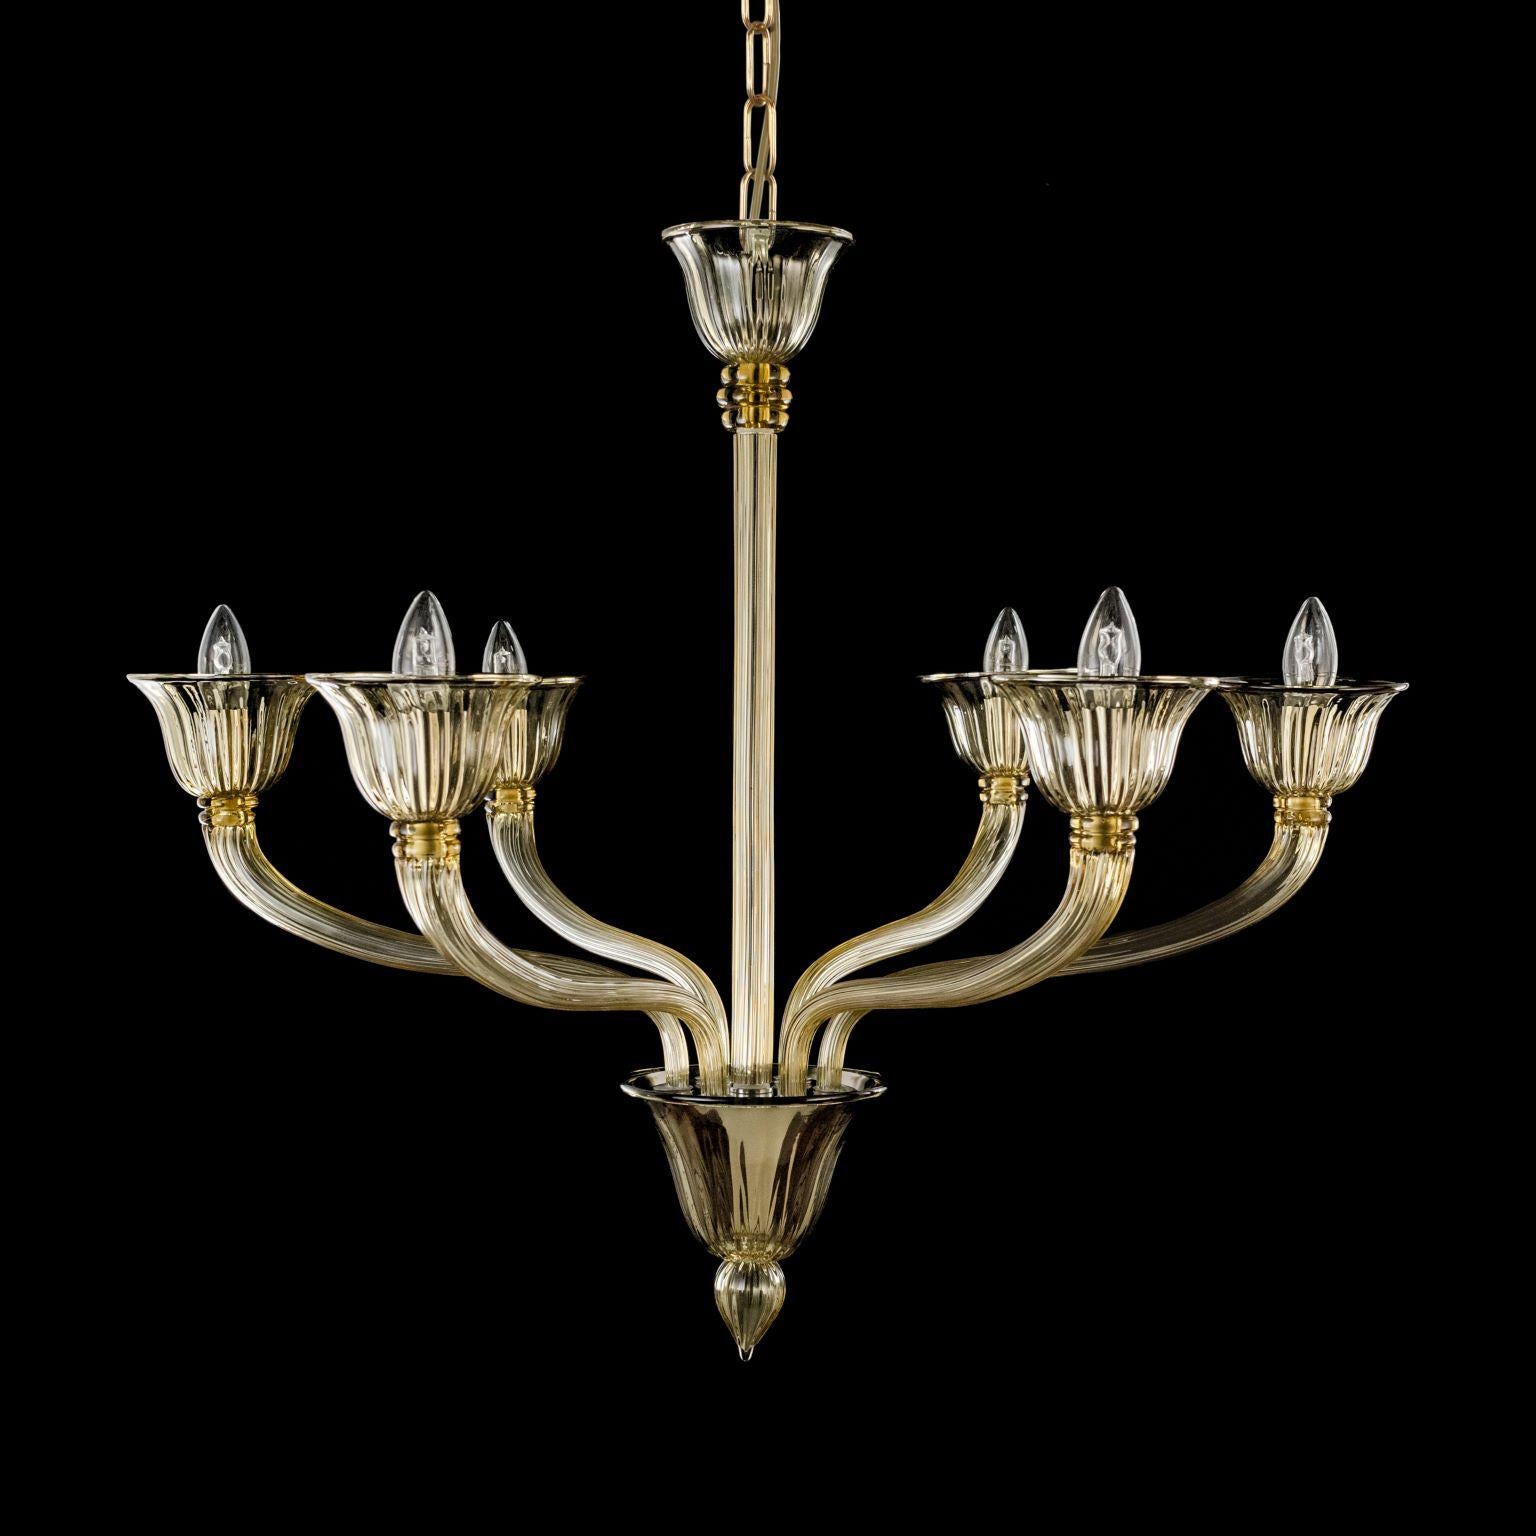 21st century chandelier 6 lights in straw Murano glass with climbing arms by Multiforme.

This Venetian chandelier in blown glass is inspired from the Art Deco style. It is characterized by arms which are bended upwards in coloured glass, which